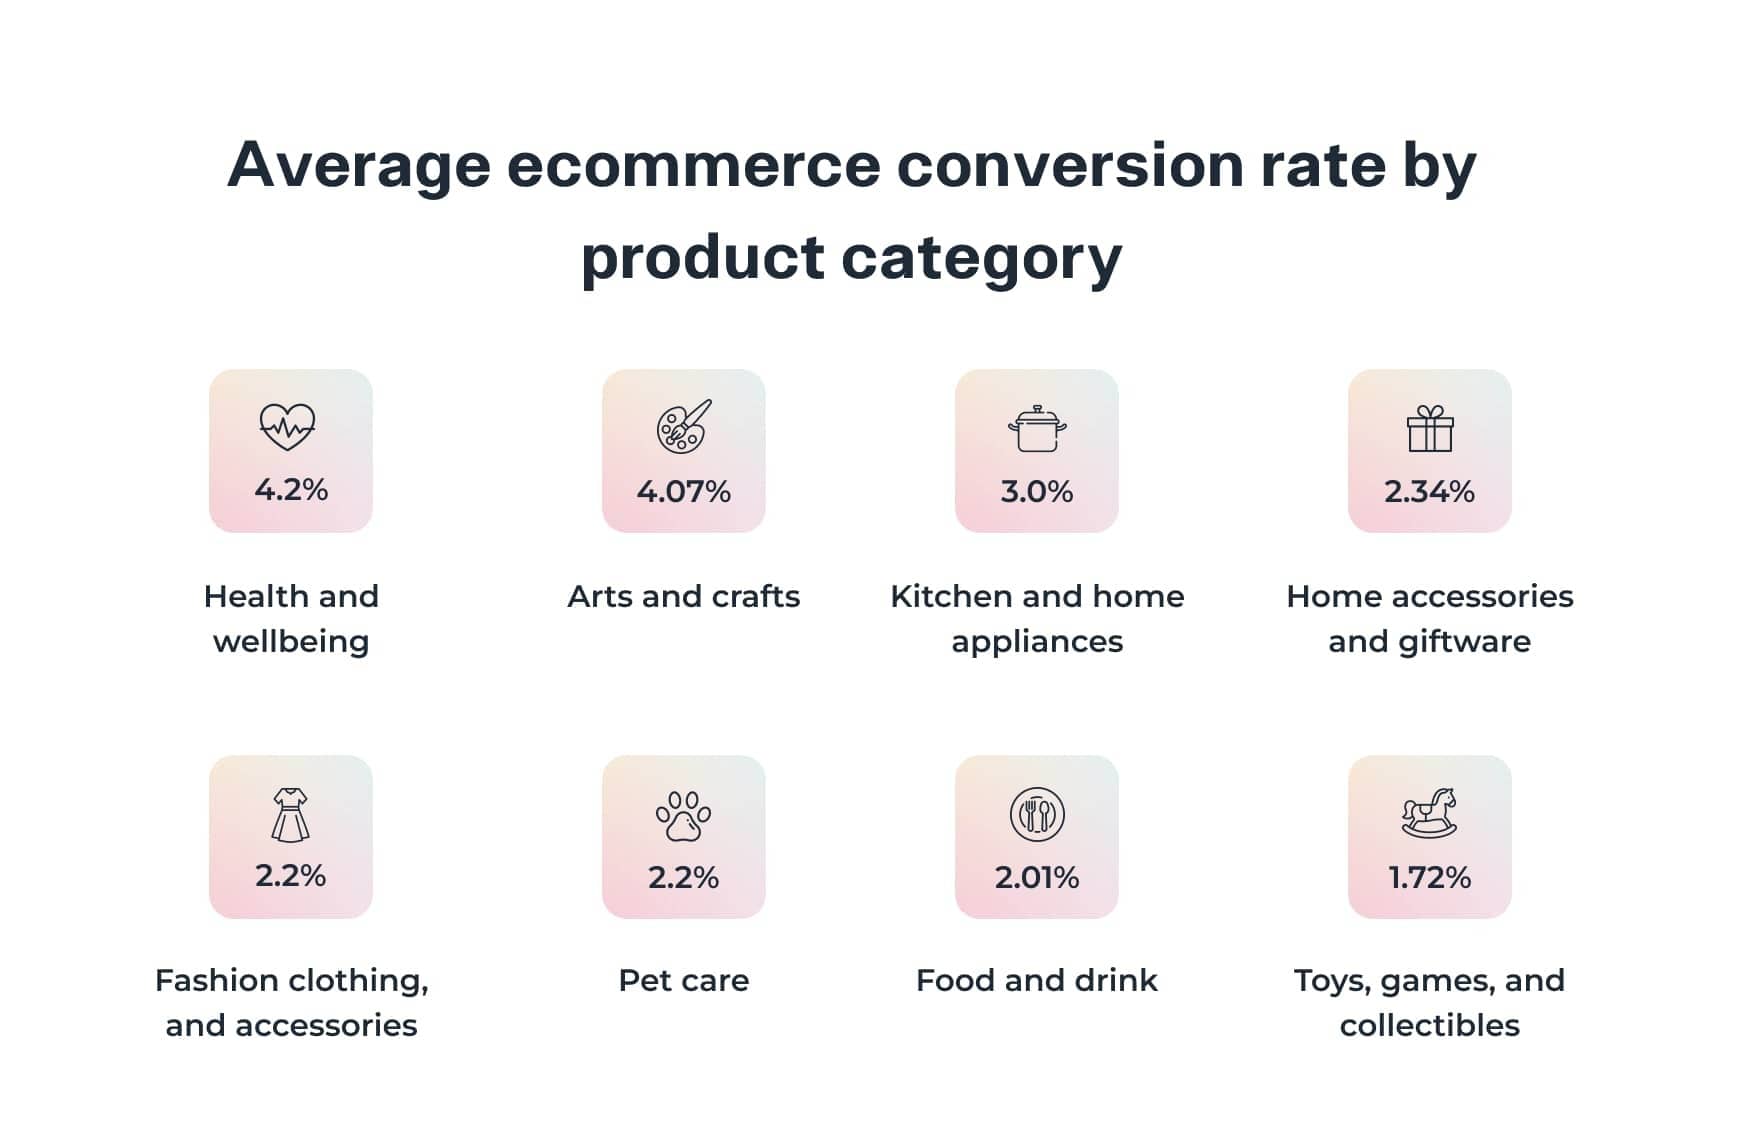 Average ecommerce conversion rate by product category can vary significantly based on the type of products being sold. Some categories, like Fashion eCommerce, tend to have higher conversion rates due to the visual appeal and high demand